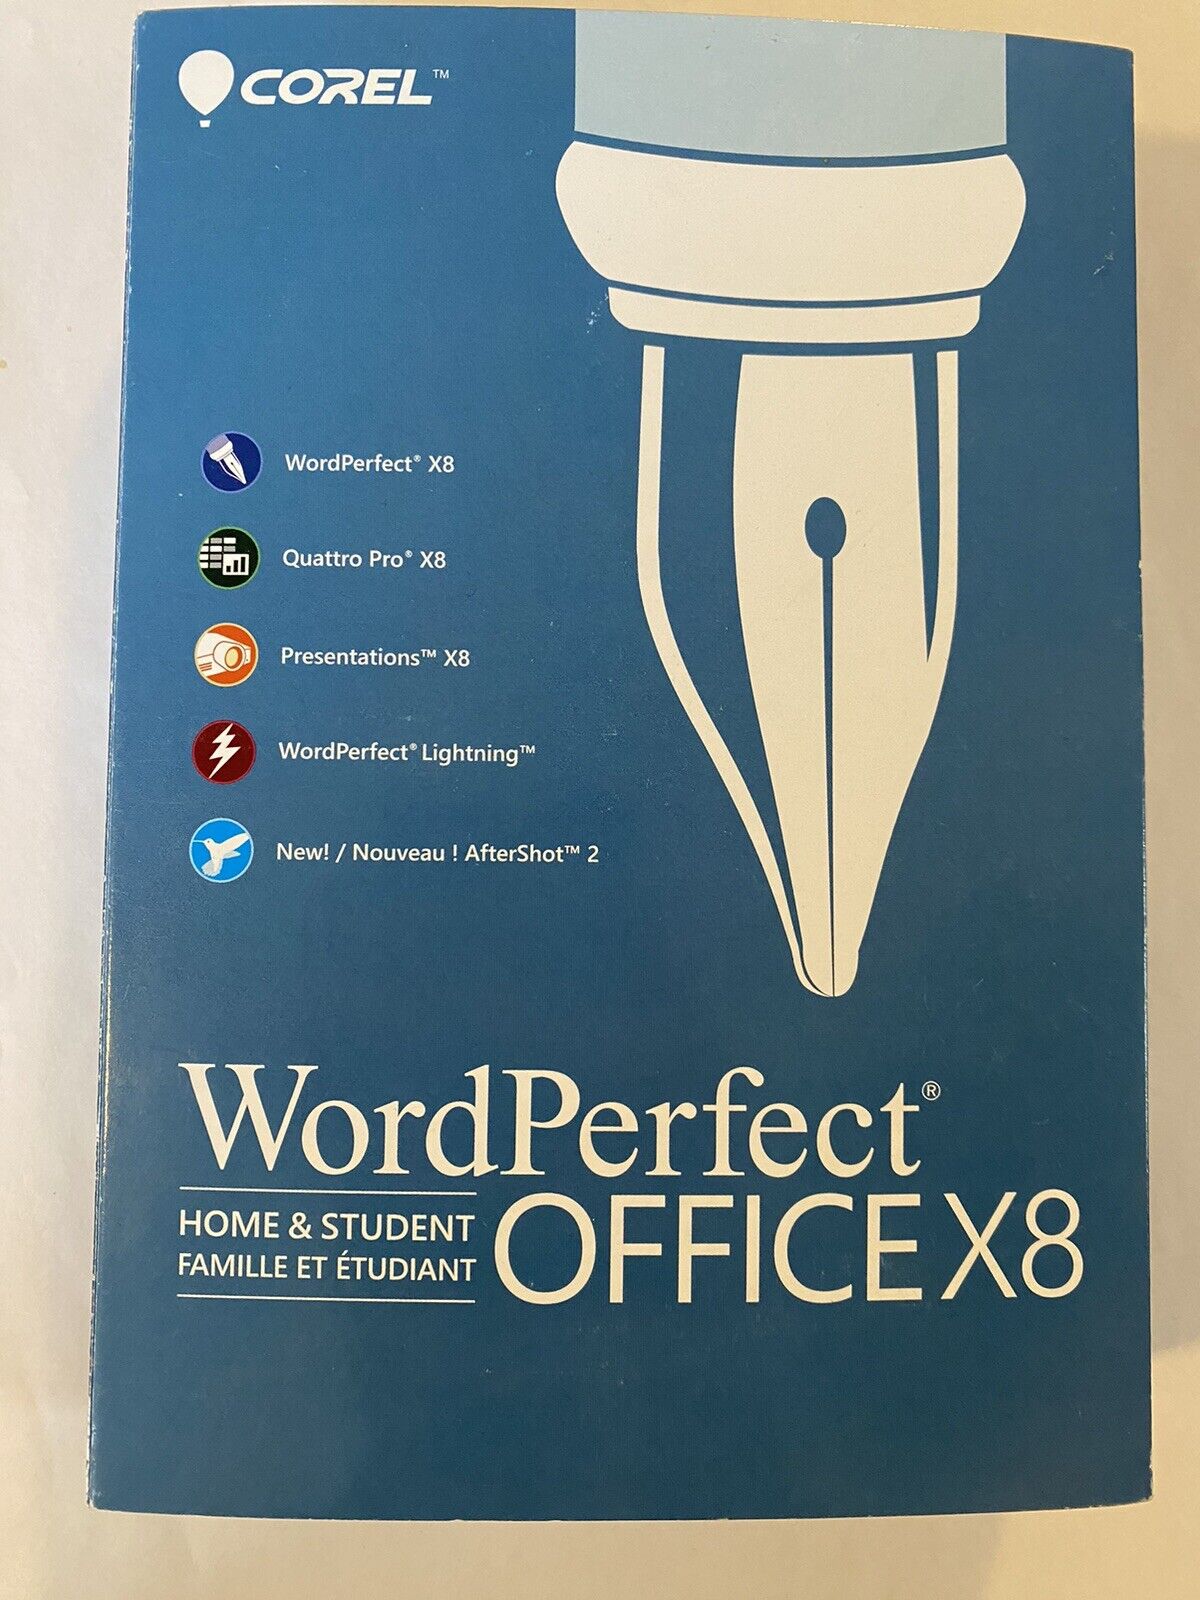 Corel WordPerfect Office Home & Student X8 (WPOX8HSEFMB) for PC (Brand New)